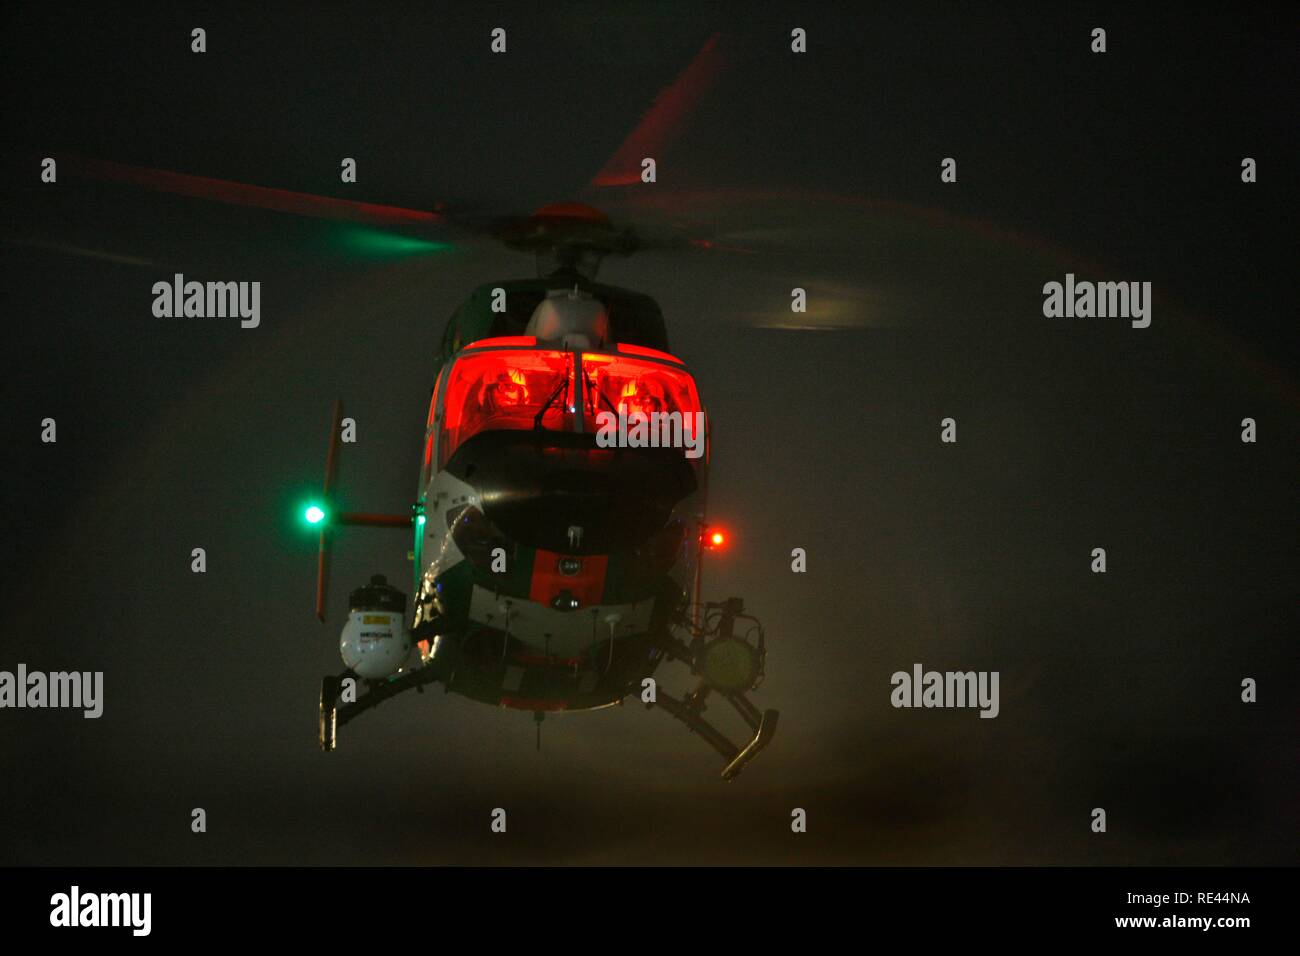 Patrol helicopter with night flying capability, image intensifier, infrared camera, night mission, police flying squadron NRW Stock Photo